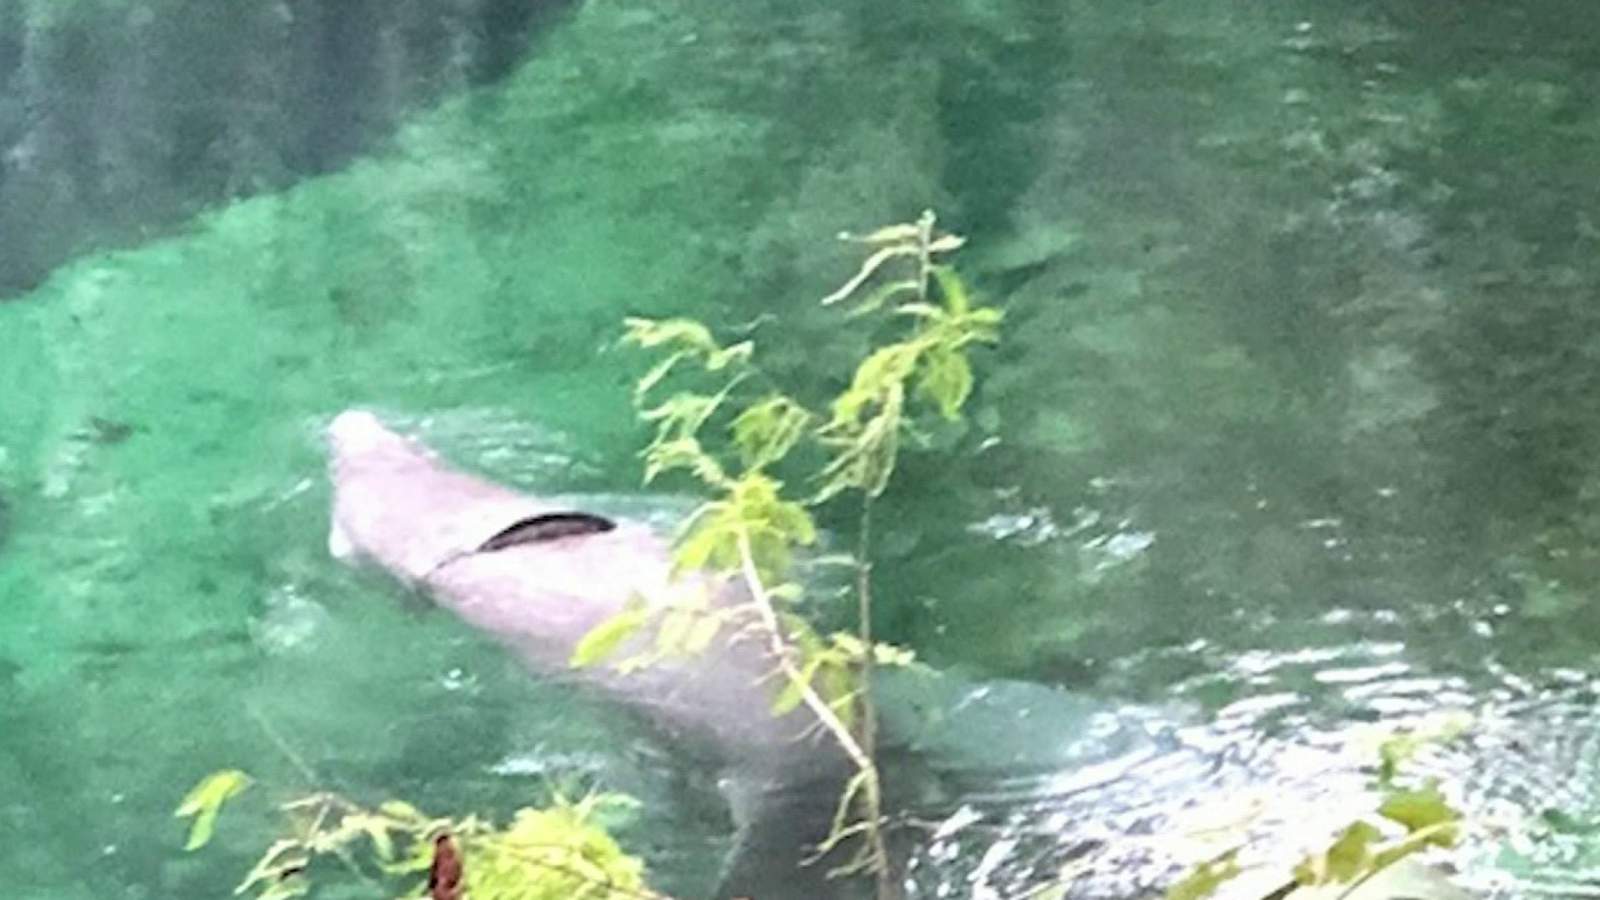 Attempts to rescue manatee stuck in tire foiled by pollution, other factors